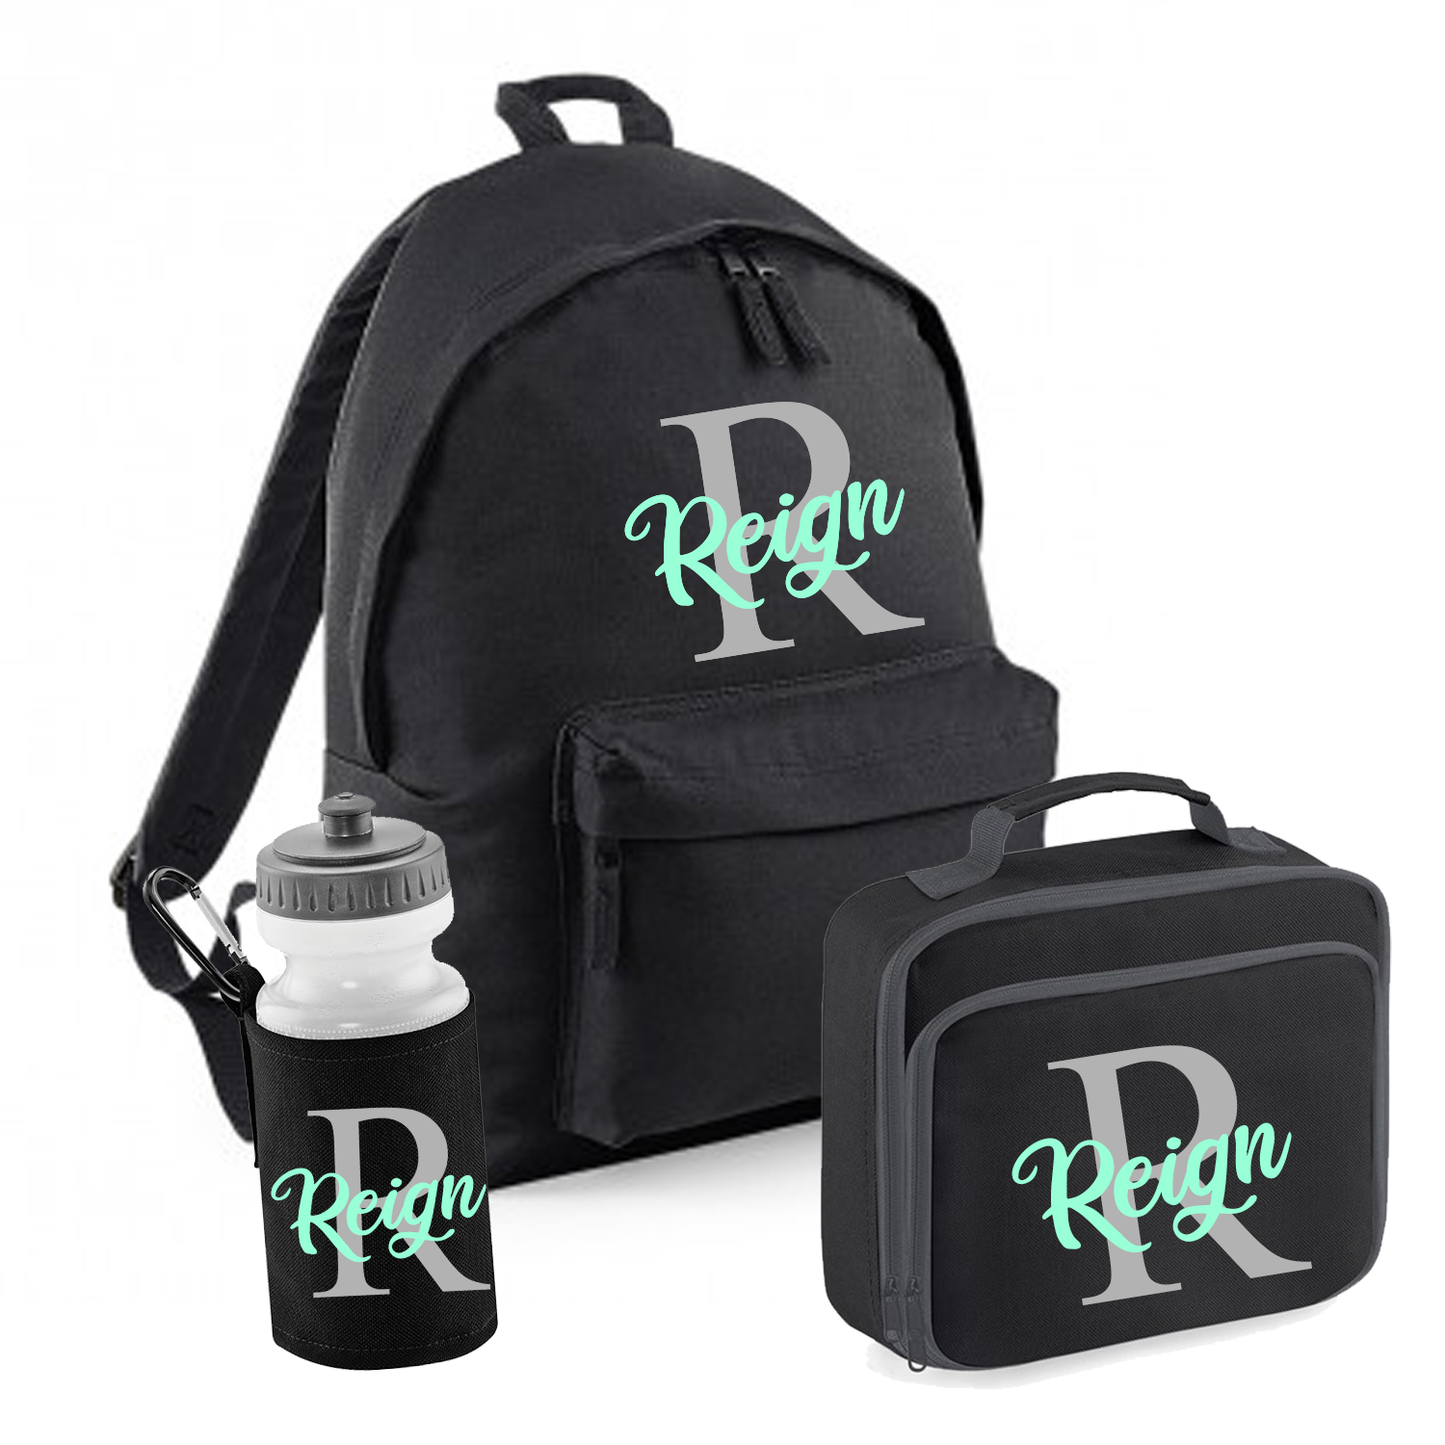 Back to School Personalised Black Set - other options available